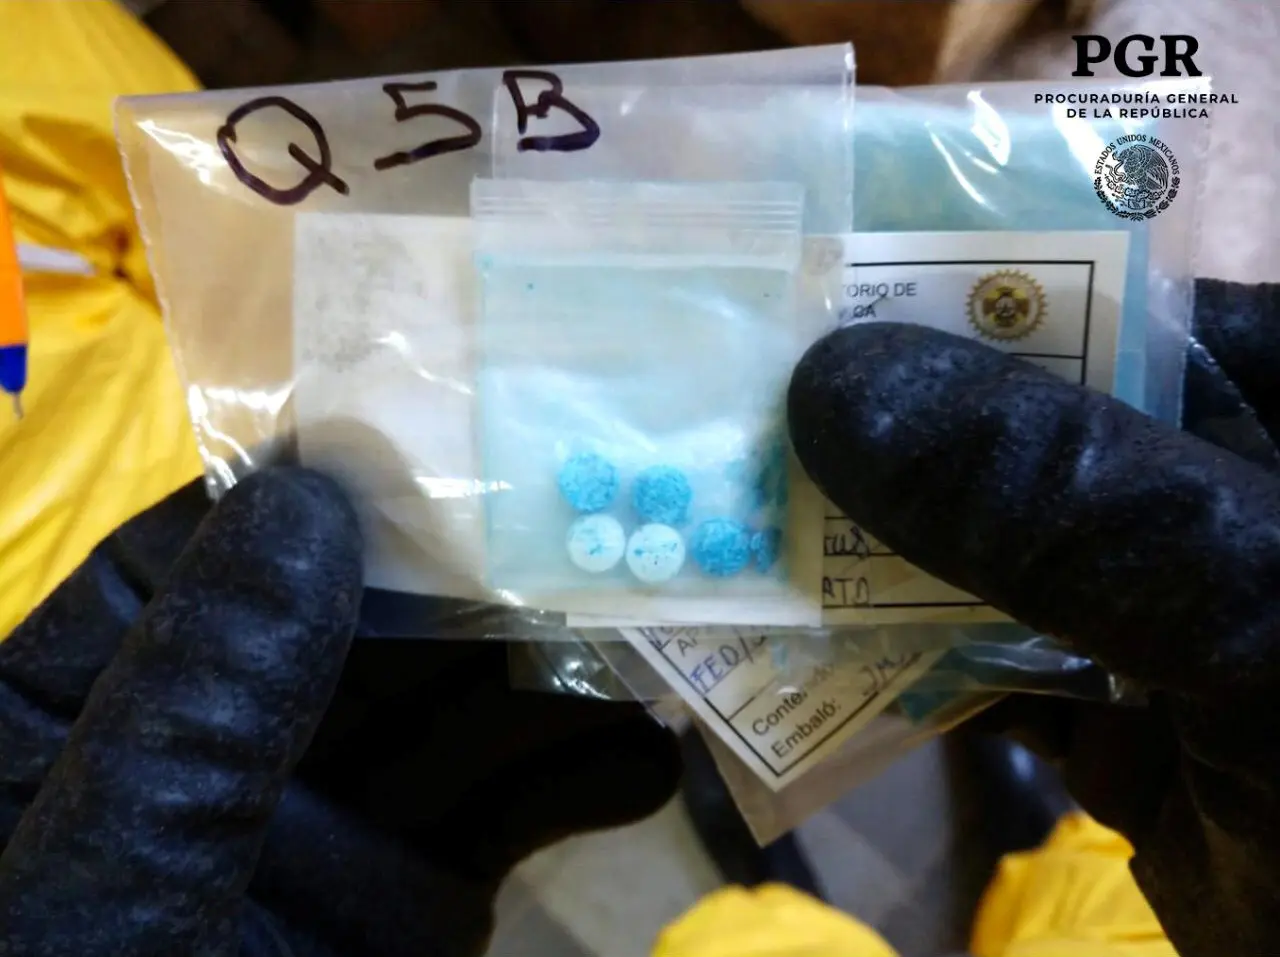 A chemical specialist in a protective suit shows pills seized at a clandestine drug processing laboratory of fentanyl located in the Azcapotzalco municipality, in Mexico City, Mexico, in this handout photograph released to Reuters by PGR - Attorney General's Office, December 12, 2018. PGR - Attorney General's Office/Handout via REUTERS ATTENTION EDITORS - THIS IMAGE WAS PROVIDED BY A THIRD PARTY